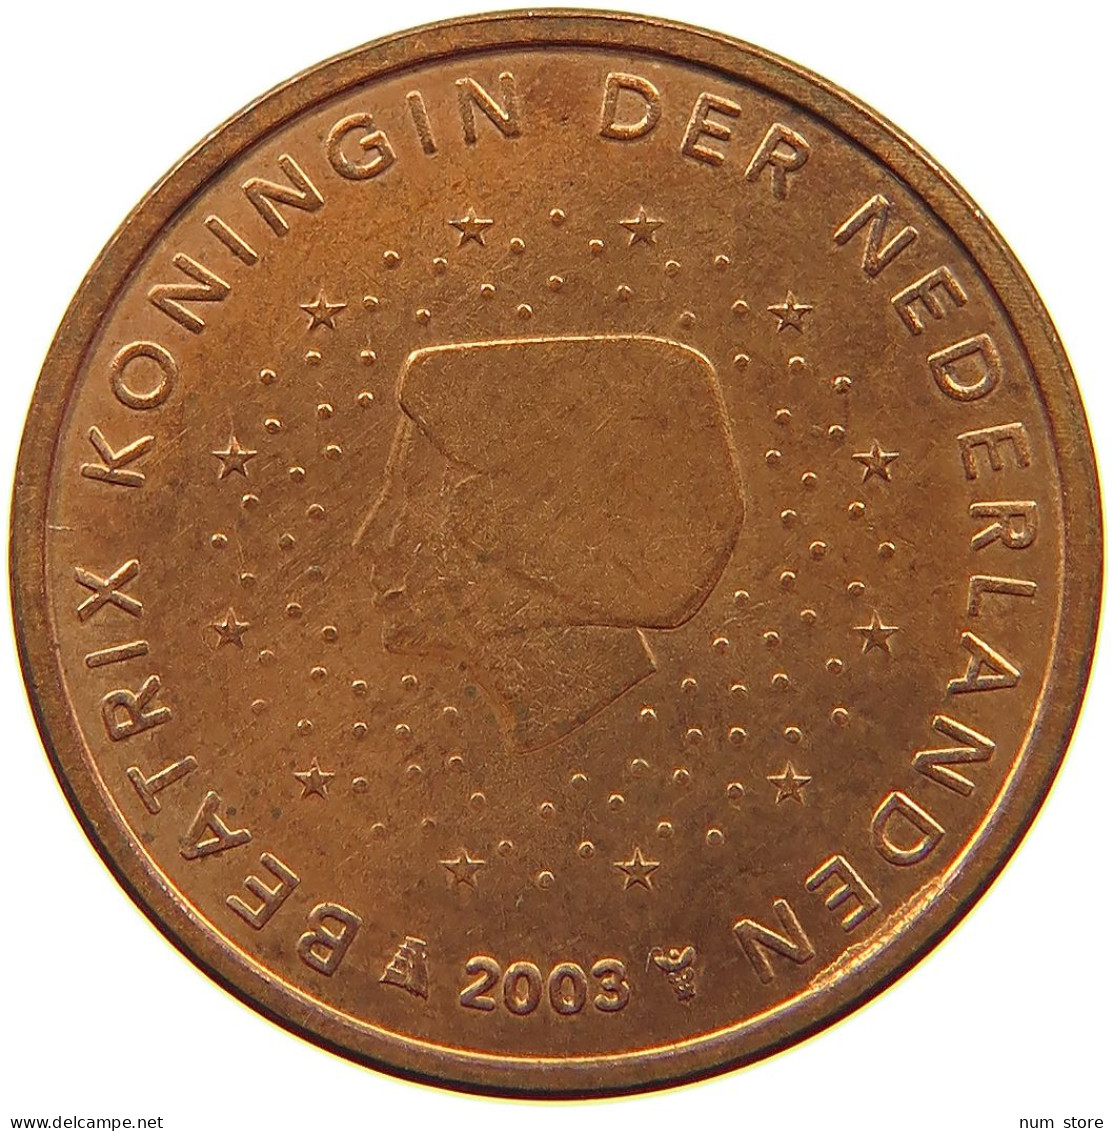 NETHERLANDS 2 CENTS 2003 DOUBLE STRUCK HEAD MINTING ERROR #a085 0903 - Pays-Bas